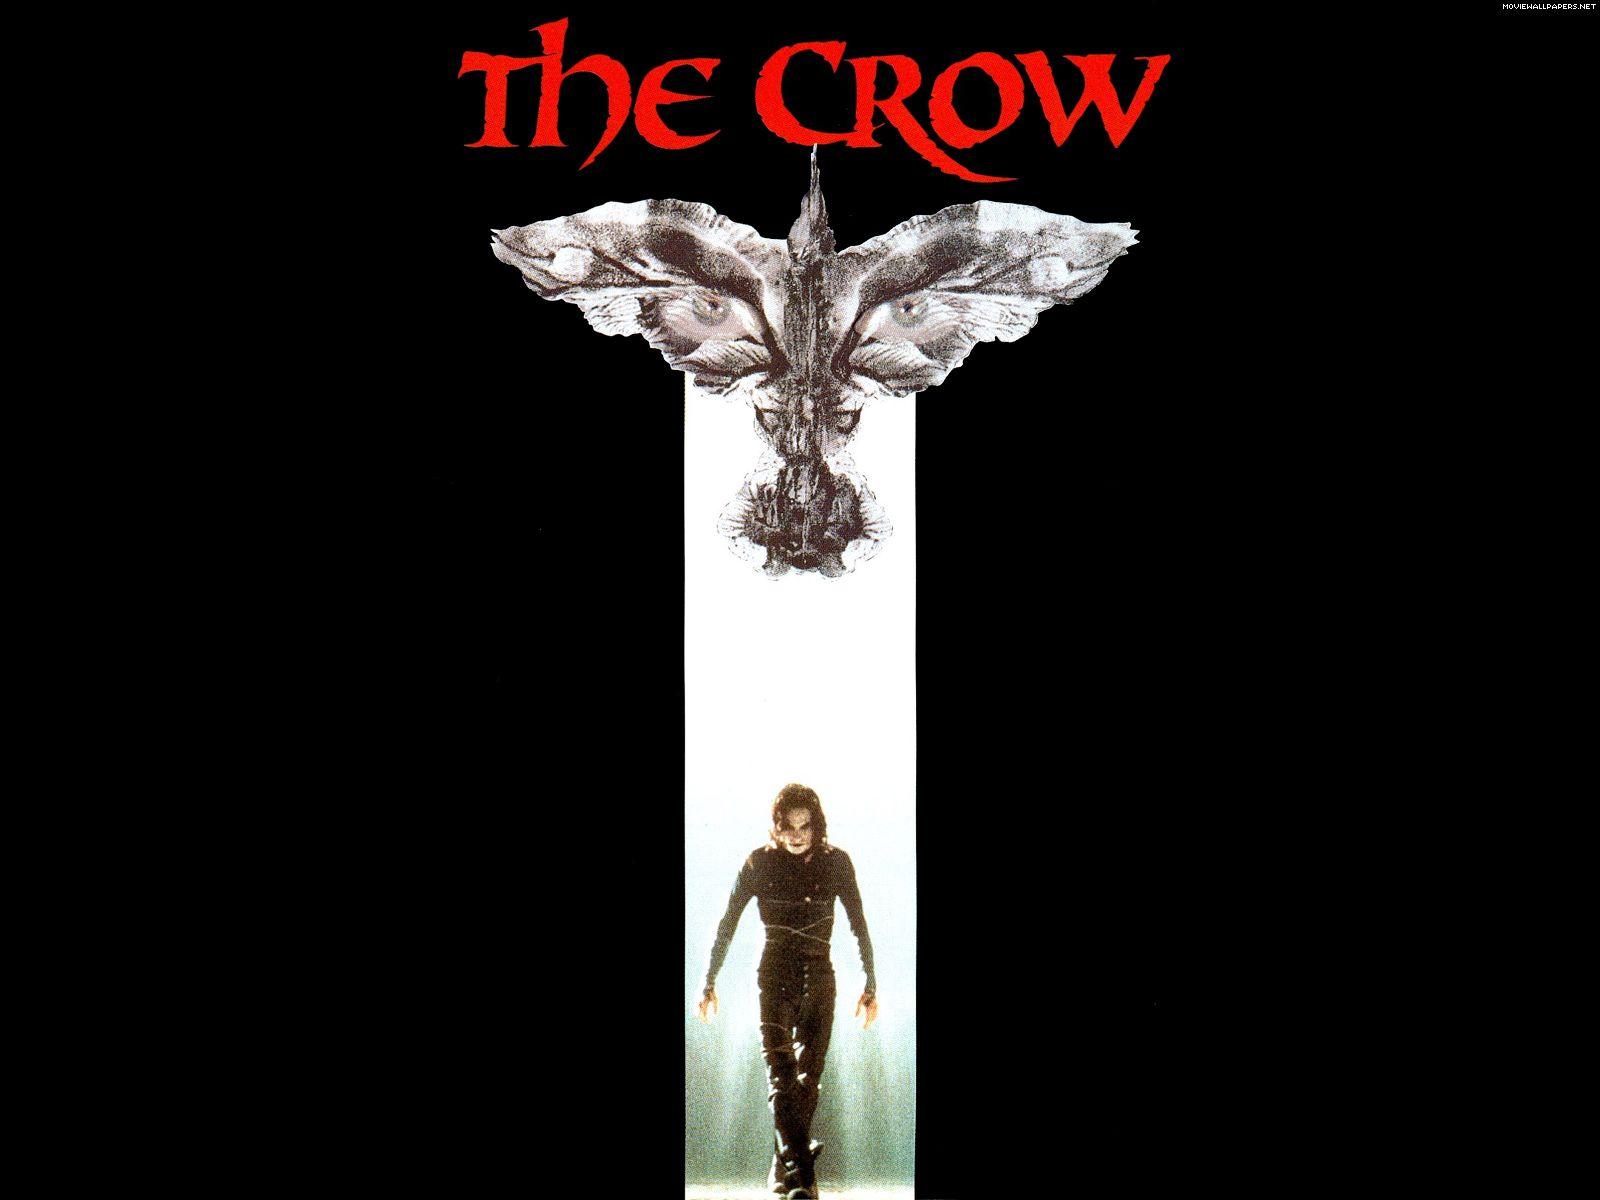 Crow Film Logo - The Crow…Please Just Leave It Alone | Sean's Humble Opinion